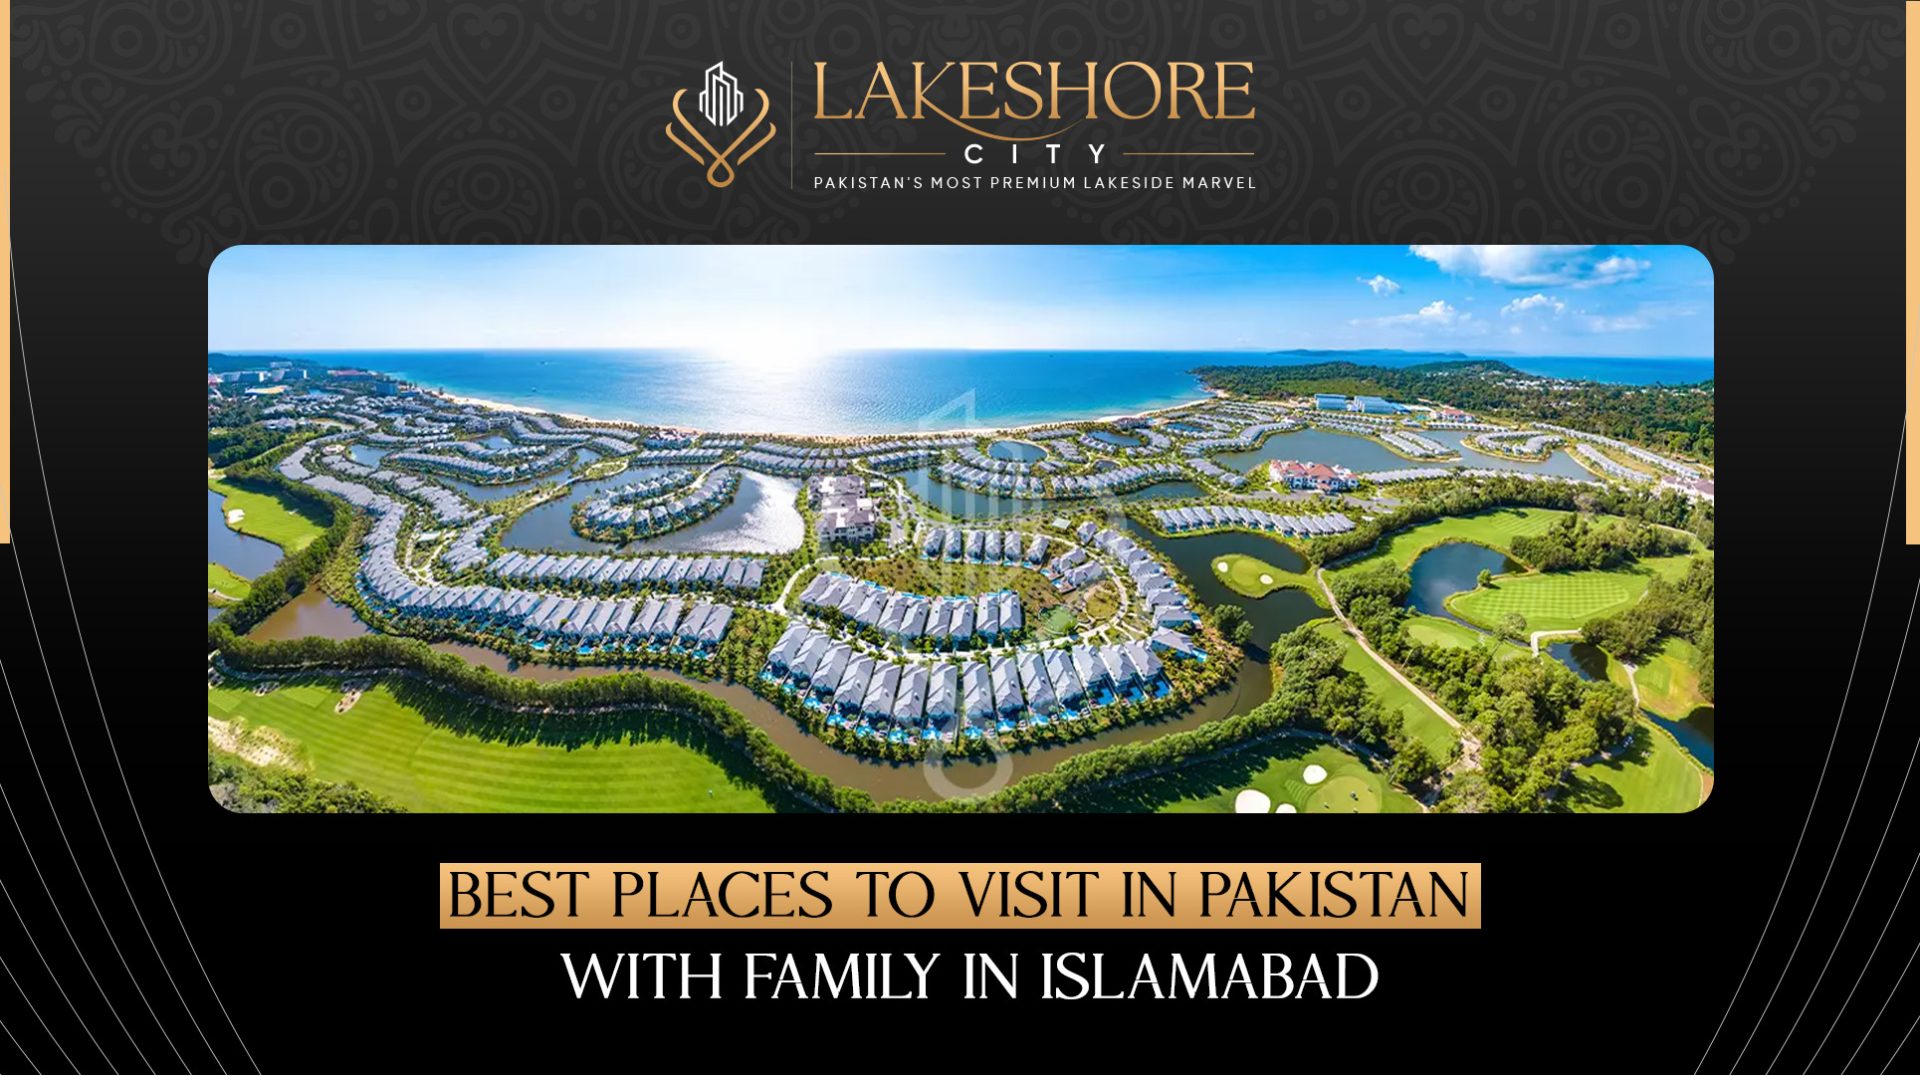 Best Places to Visit in Pakistan with Family in Islamabad